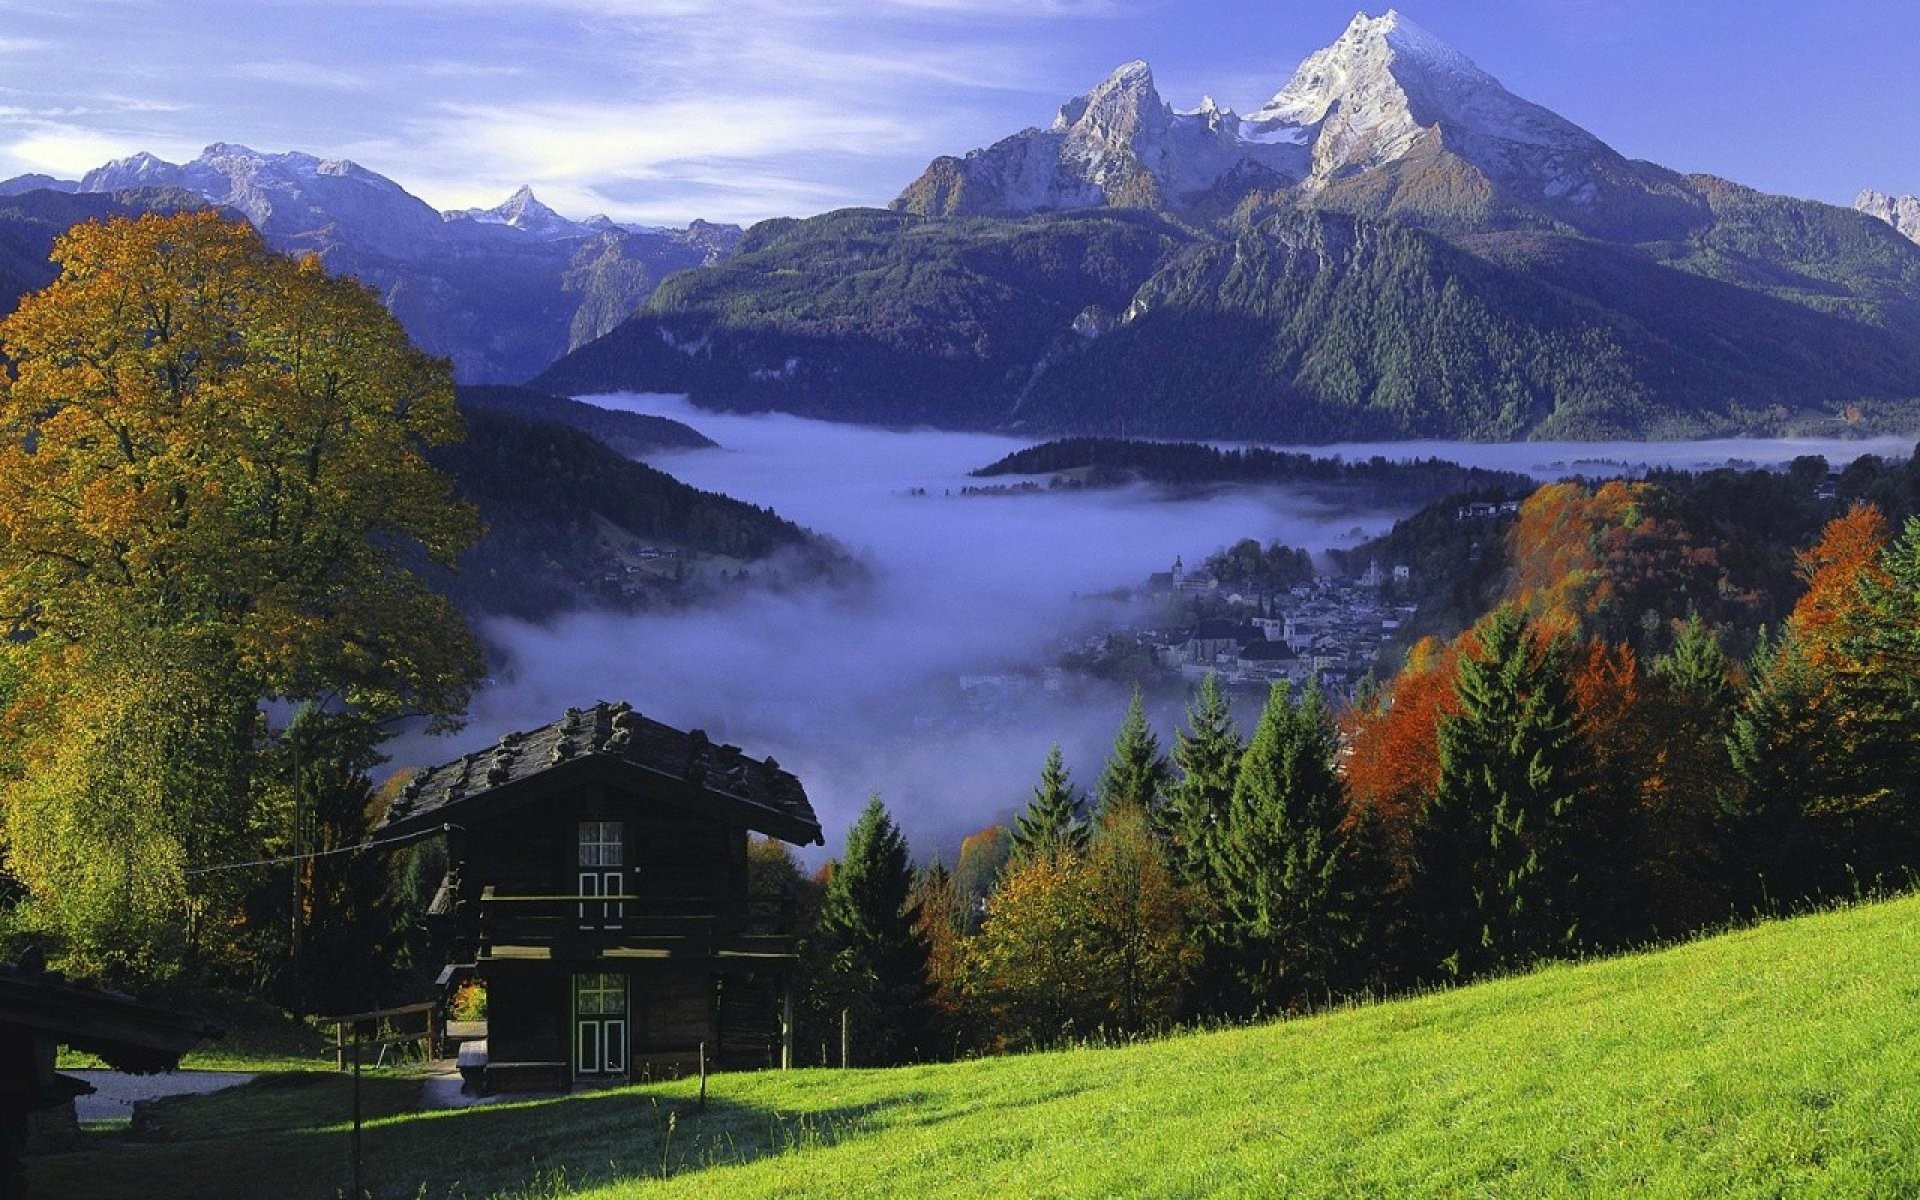 1920x1200 Bavaria Germany 308692. SHARE. TAGS: Village Desktop Colorado Photo  Background Mountain Valley Nature